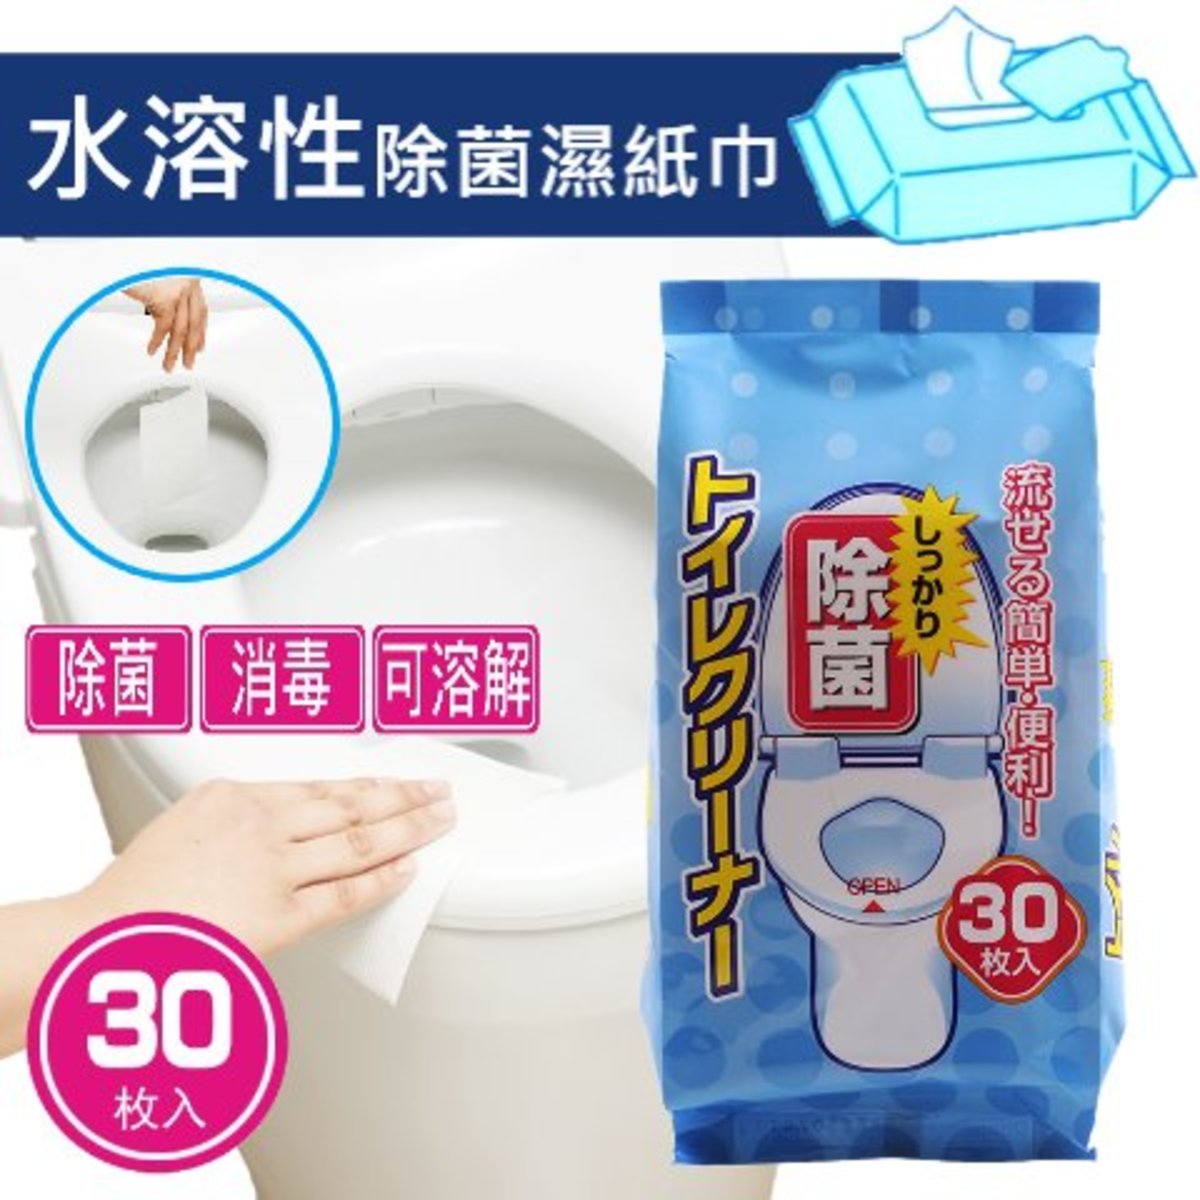 paper wipes